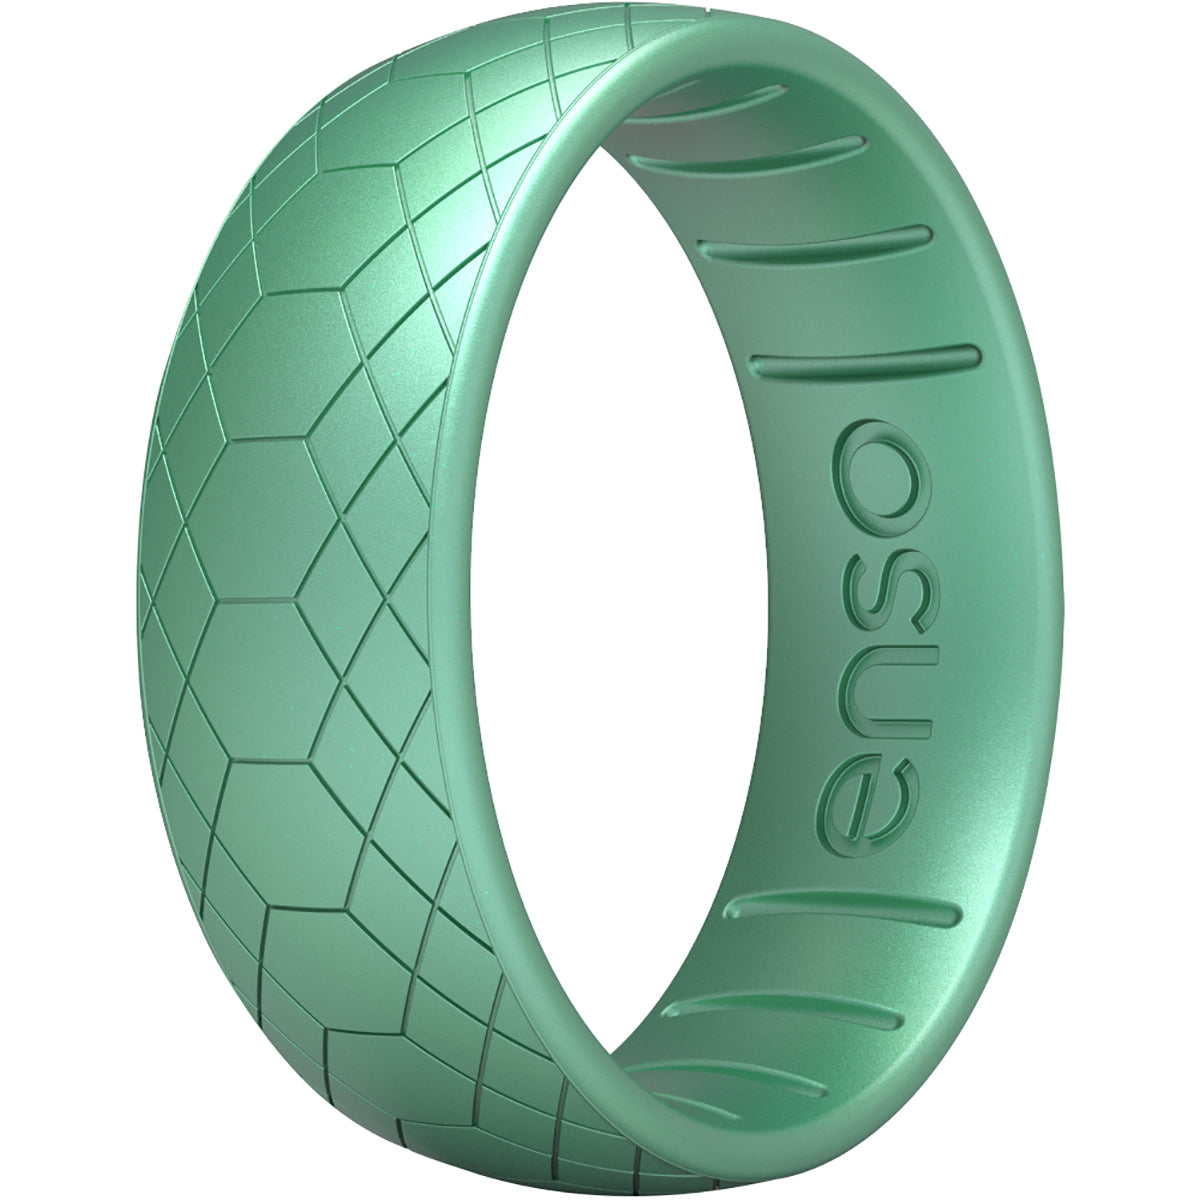 Enso Rings Classic Etched Legends Series Silicone Ring - 14 - Medusa Snake Enso Rings